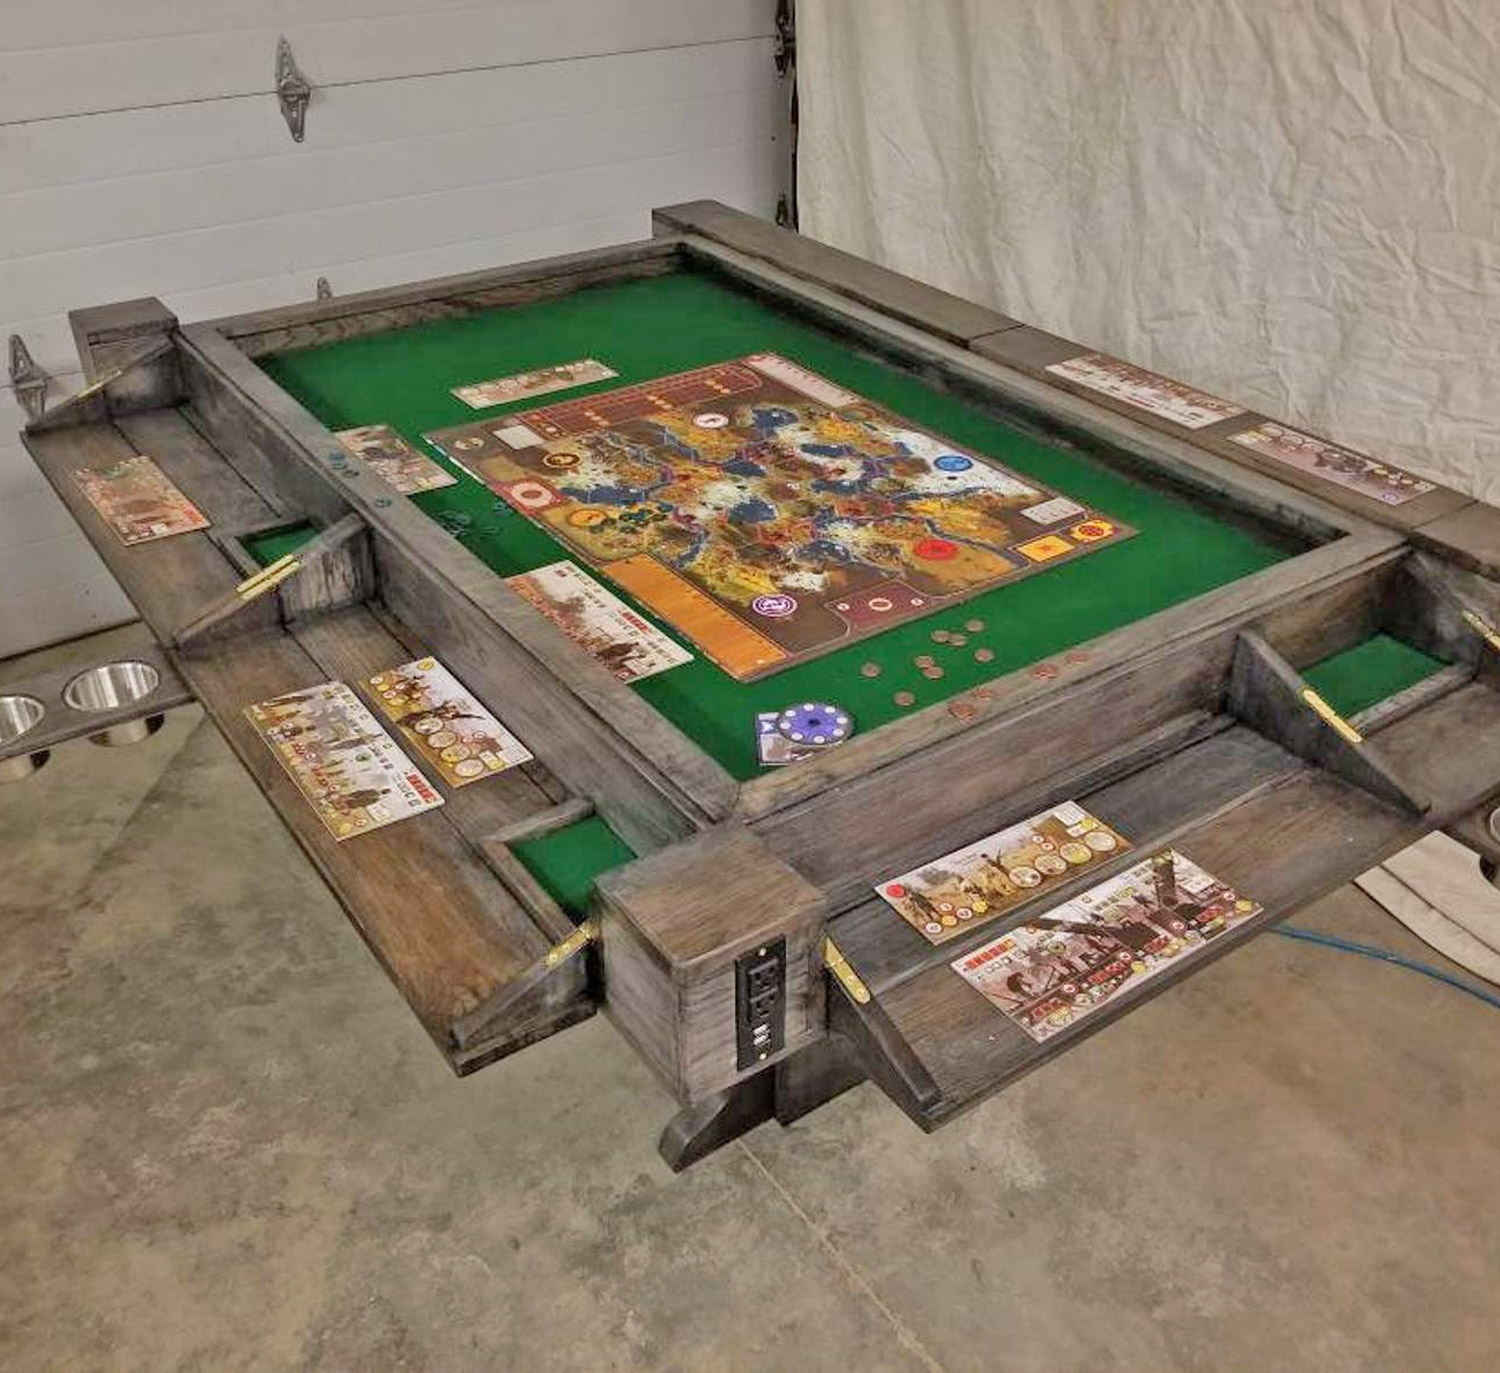 game tables